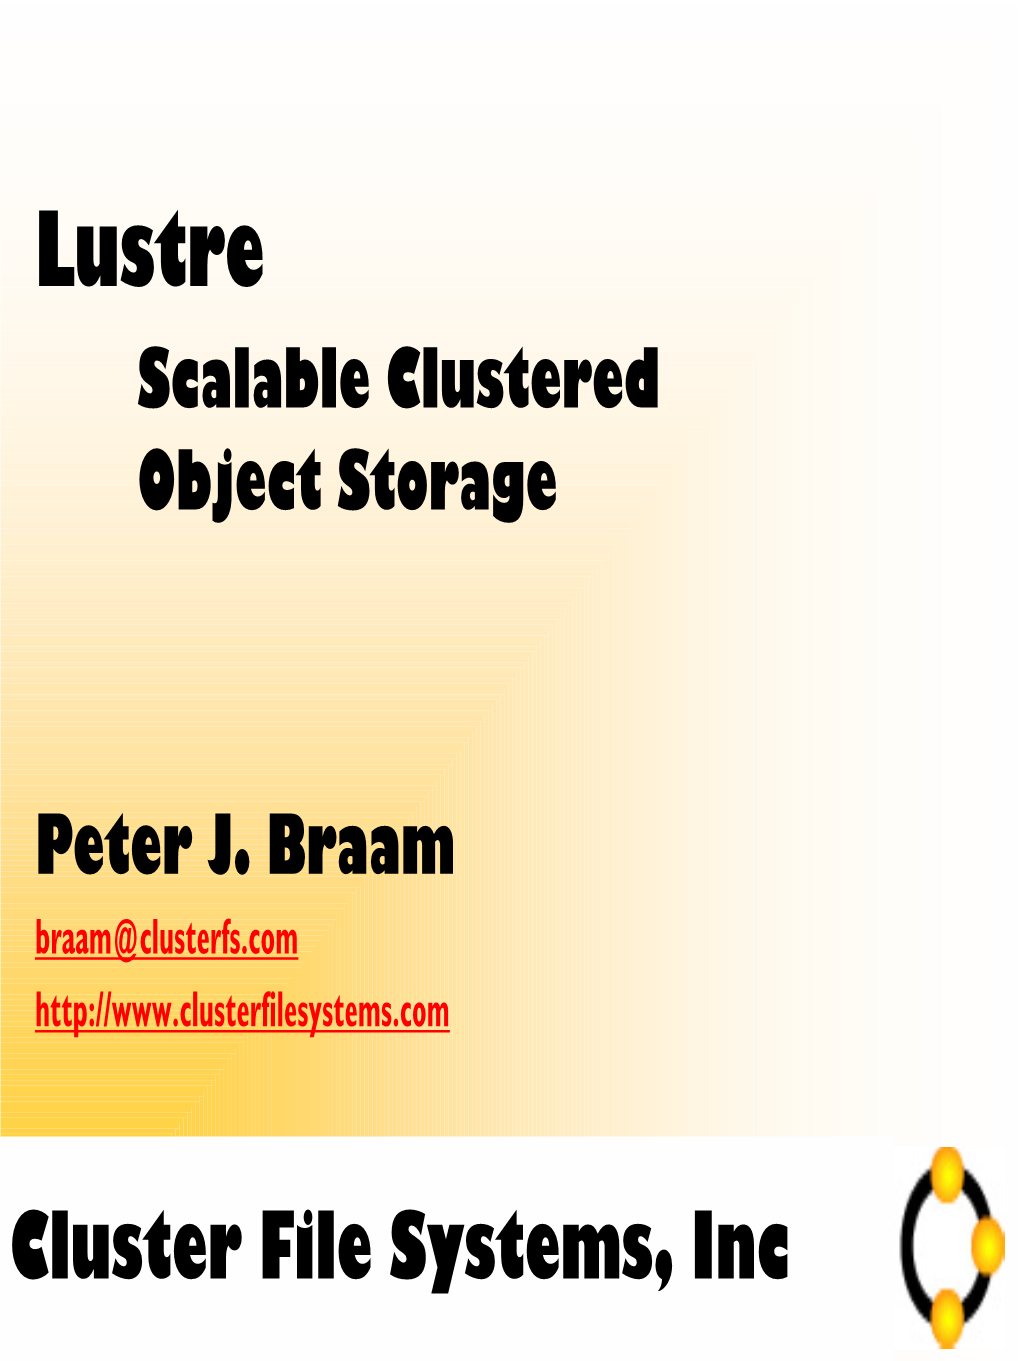 Lustre: Scalable Clustered Object Storage (2002)